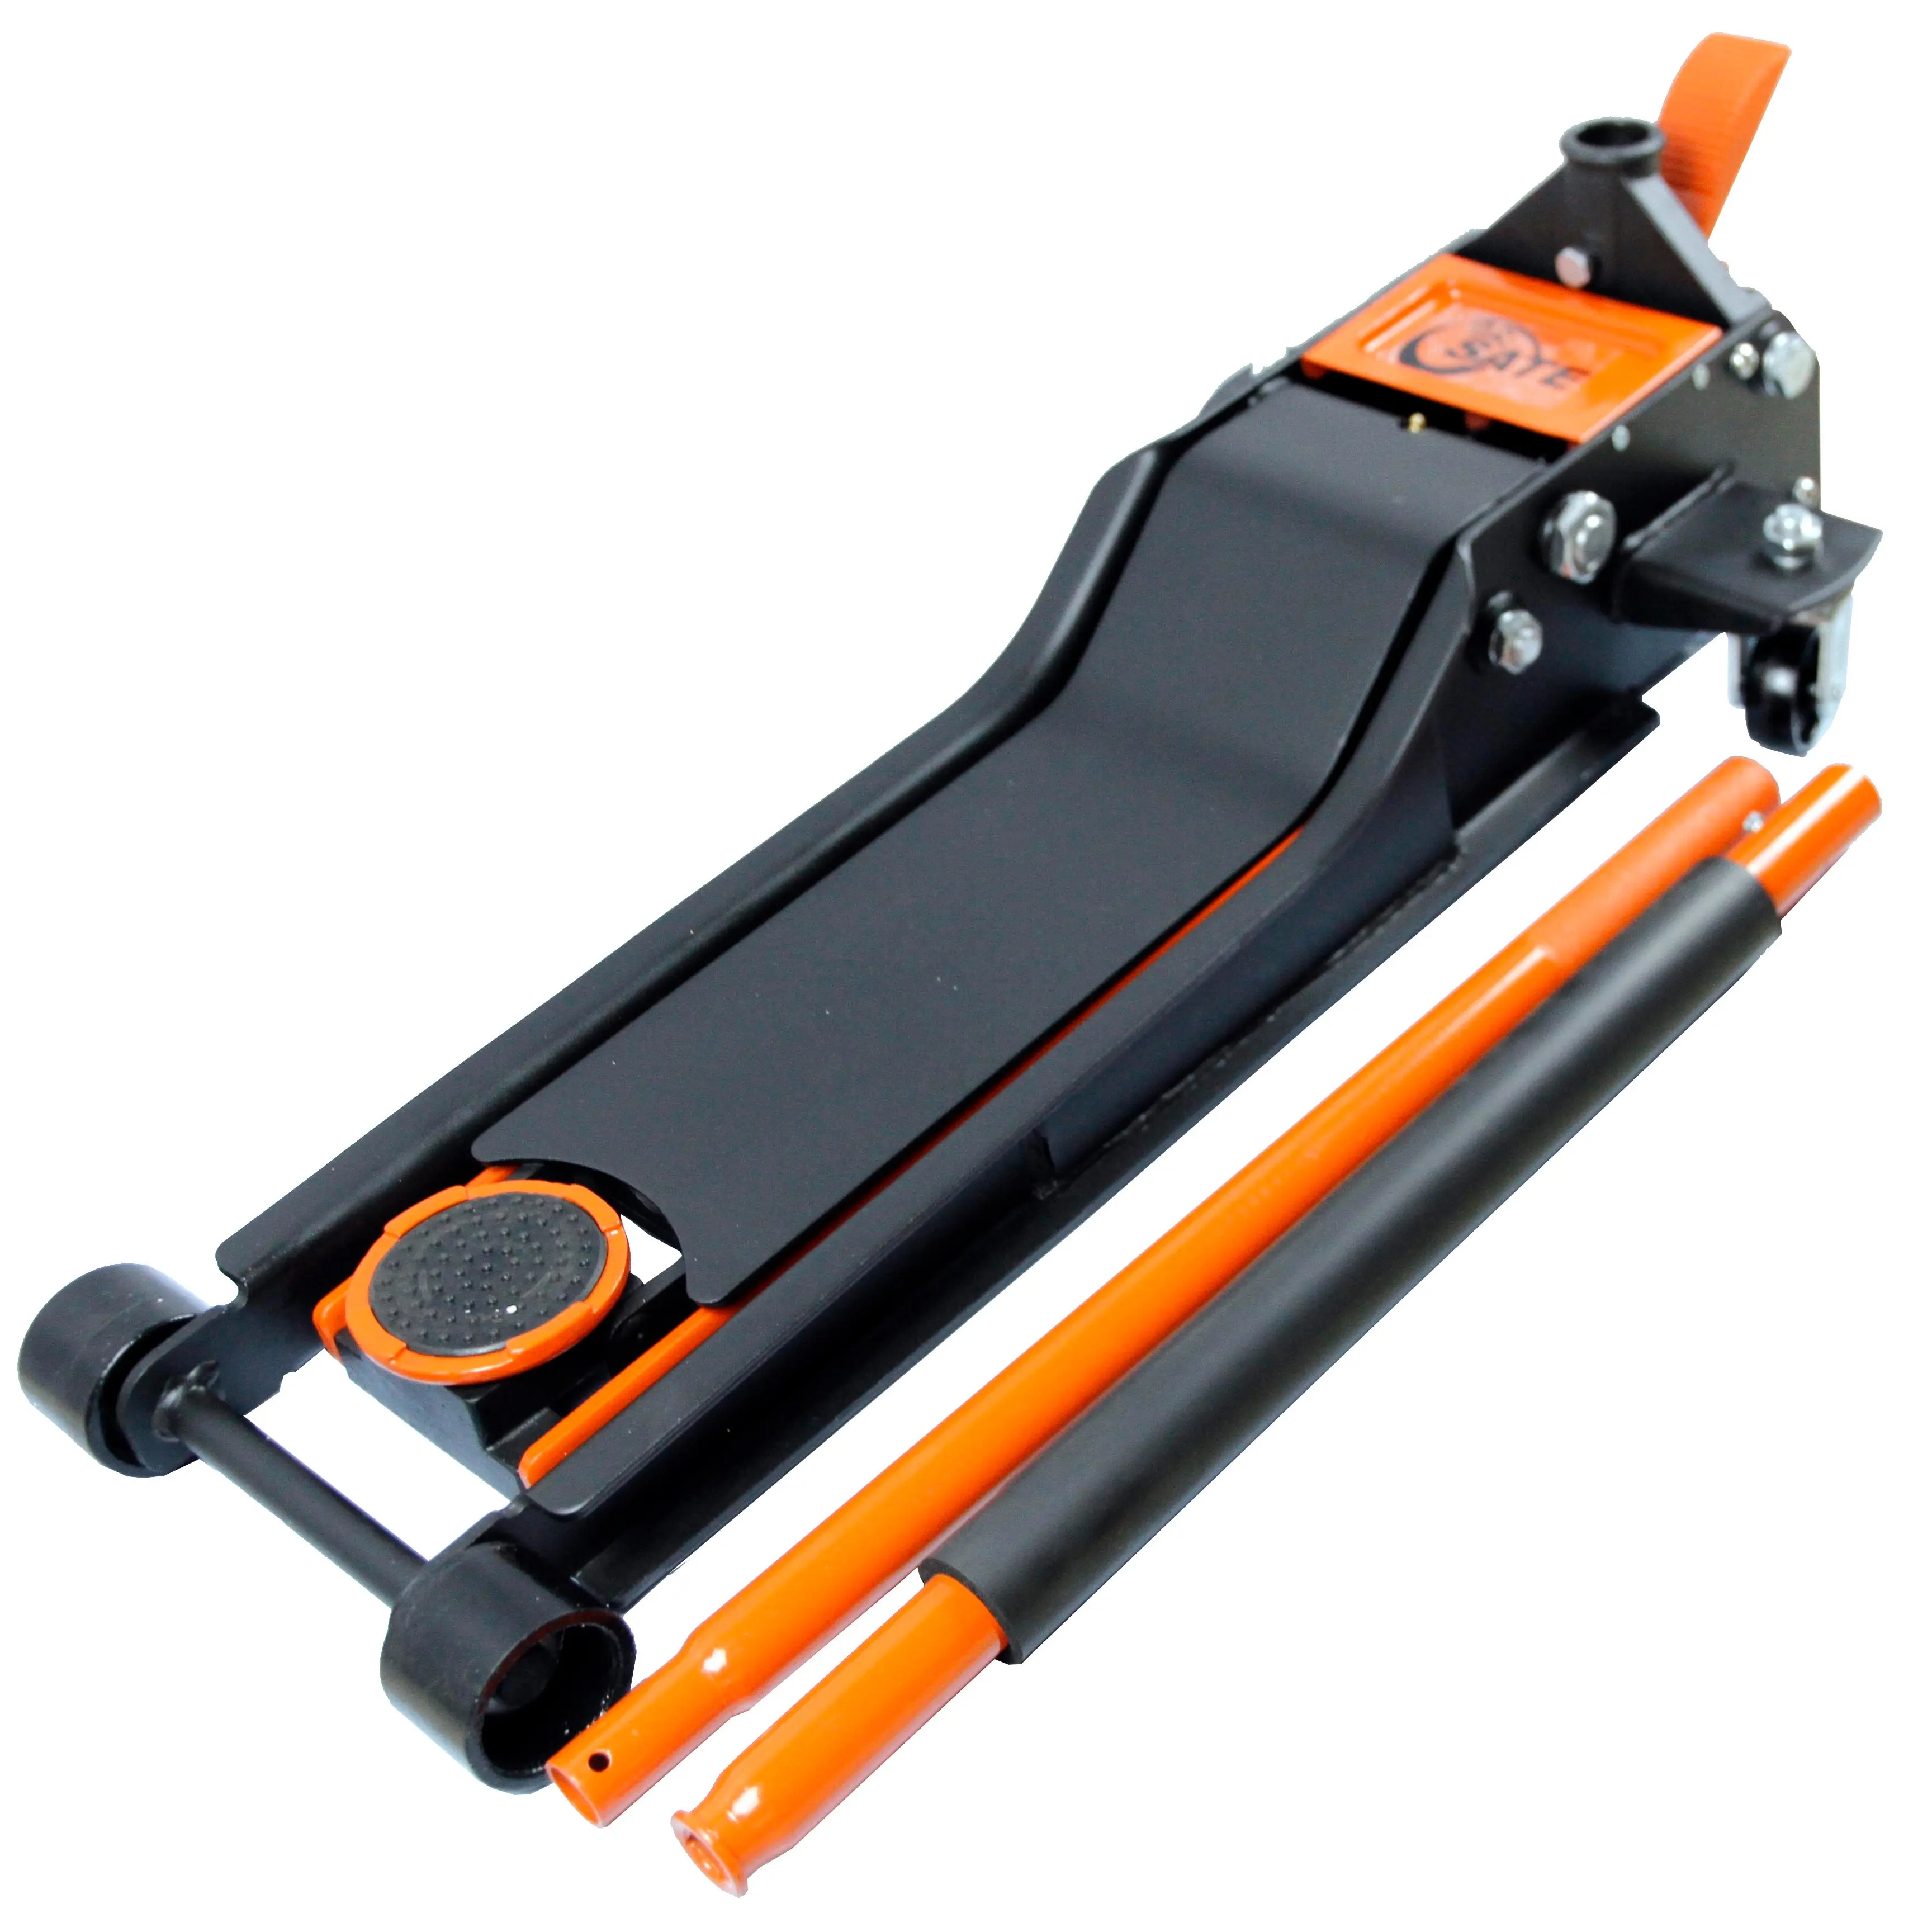 2T 70-610mm Hydraulic Low Profile Car Floor Jack with CE standard